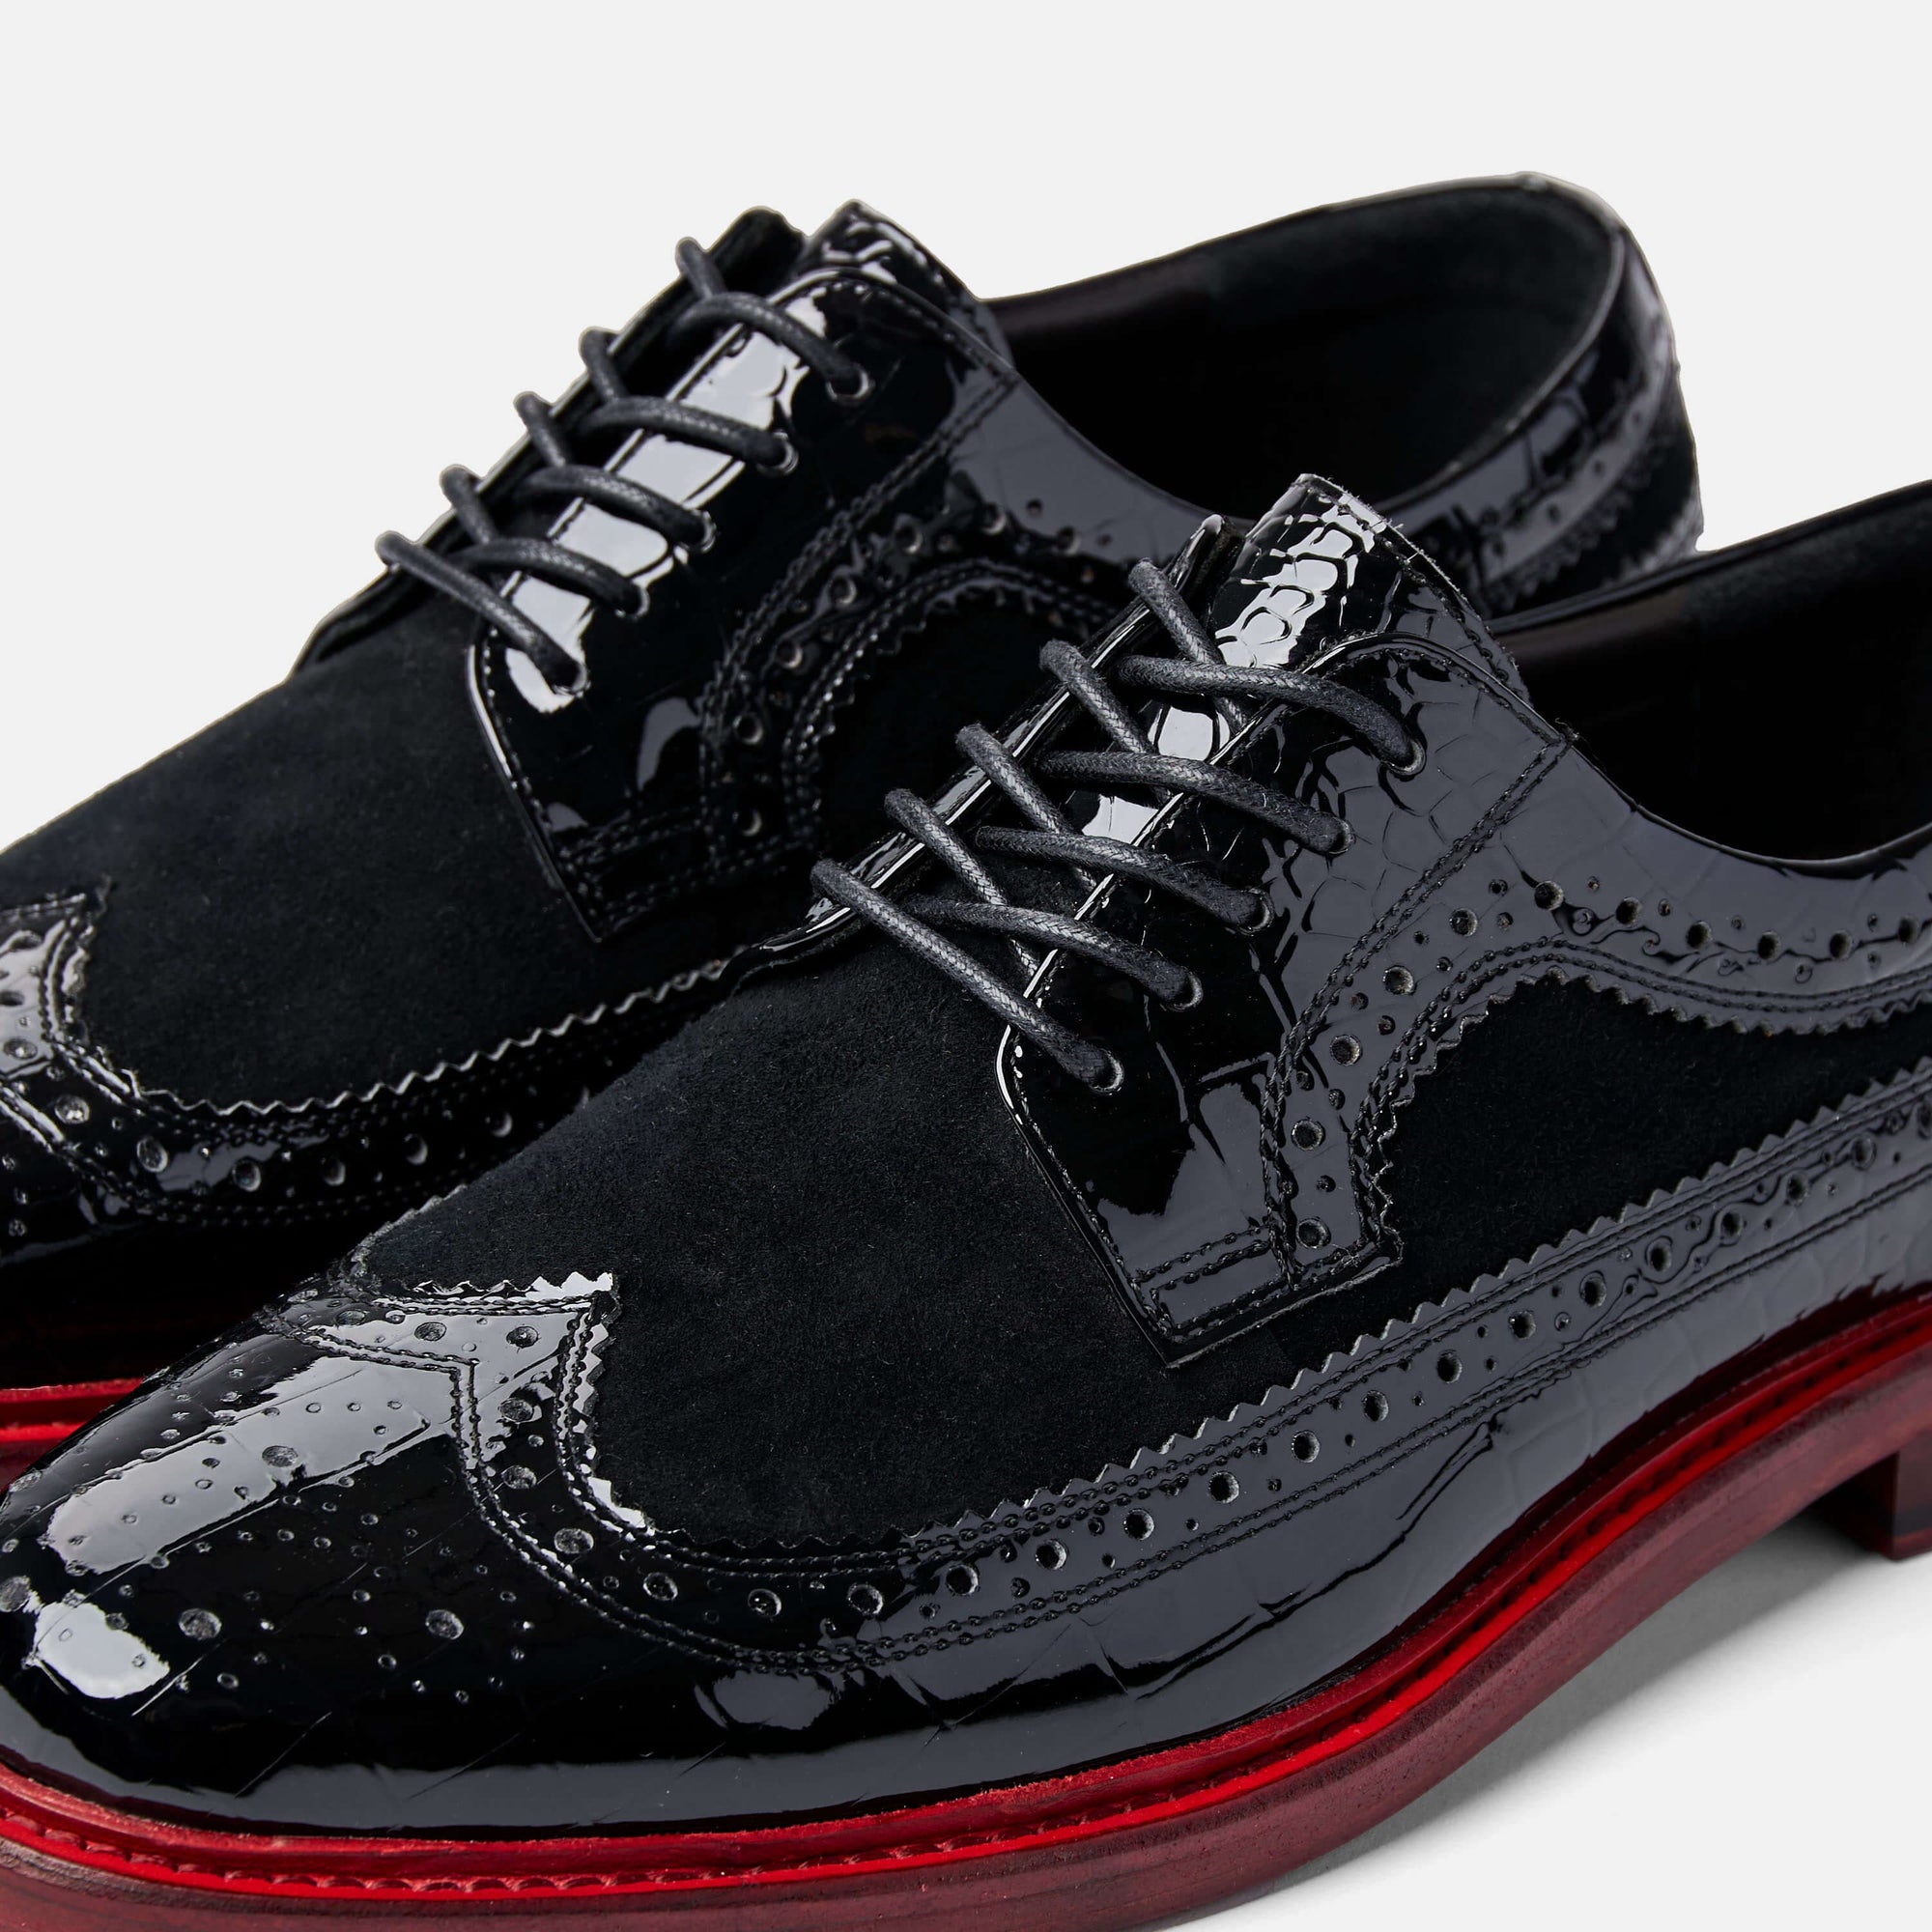 L-1045 Black Patent Leather Button - in 7 Sizes